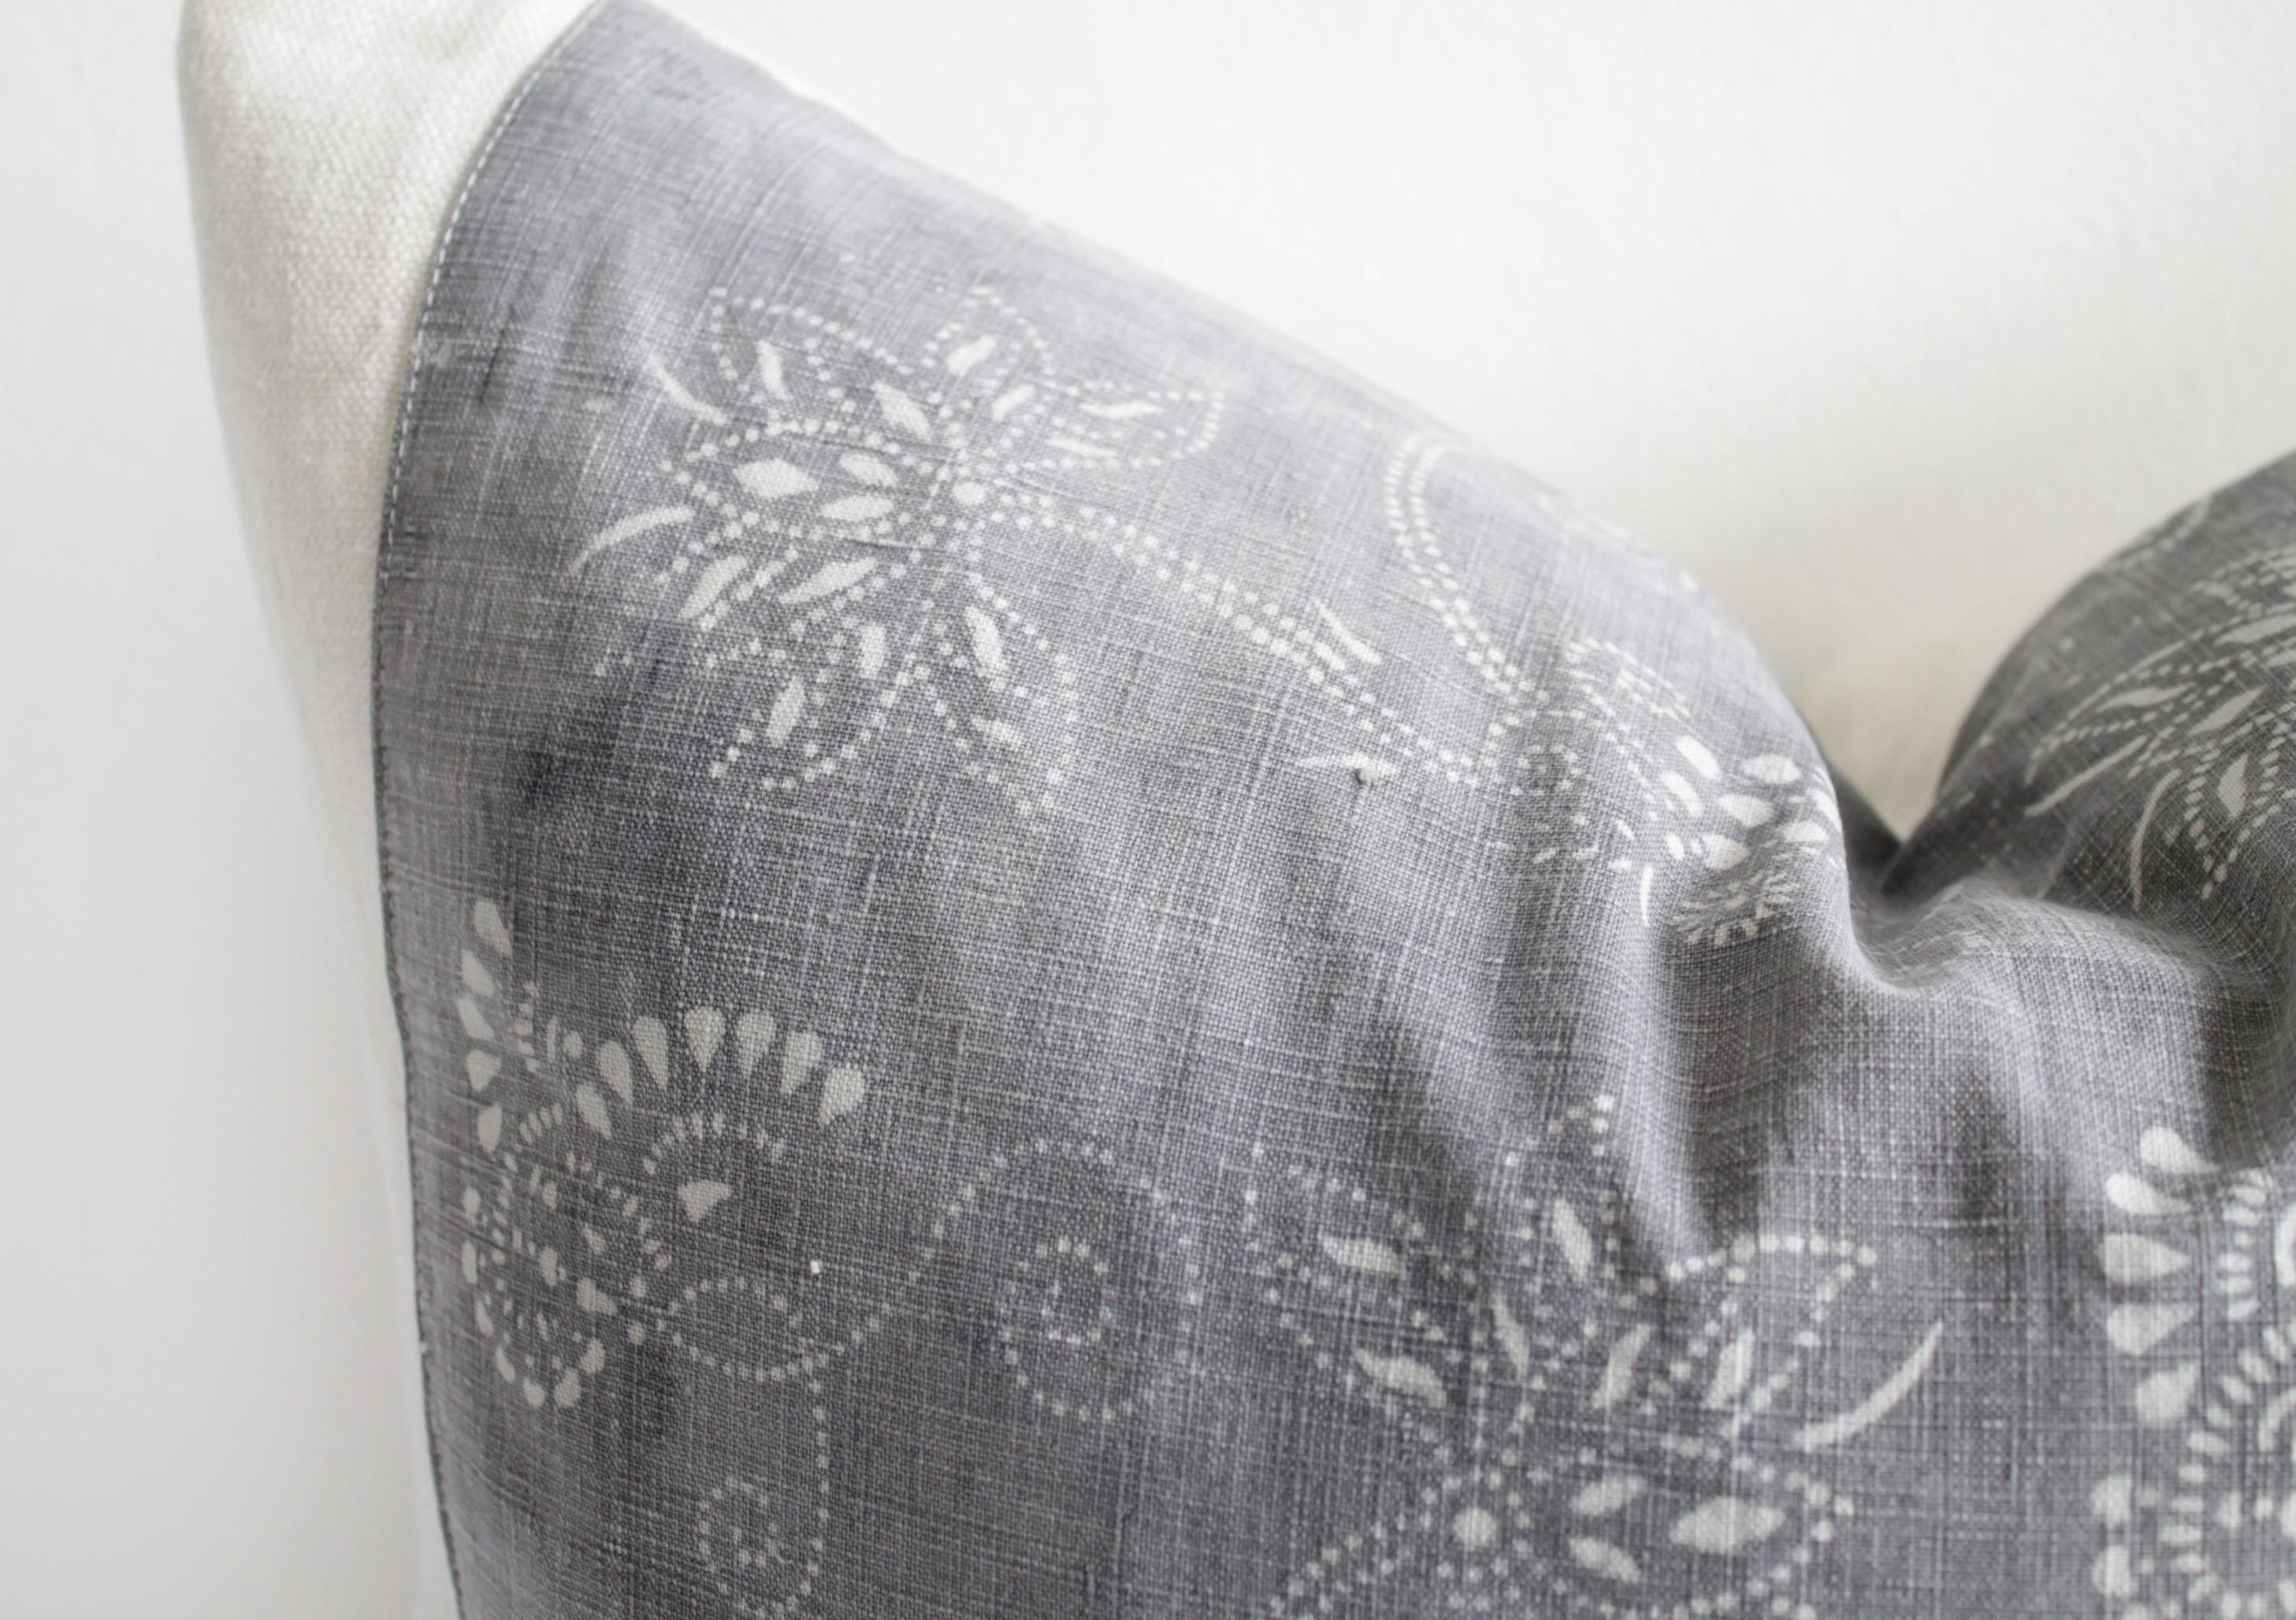 This beautiful pillow features a vintage textile face in a faded gray and soft white pattern, blocked with a light sand European linen, and backed with the same linen. Our pillows are constructed with vintage one of a kind textiles from around the